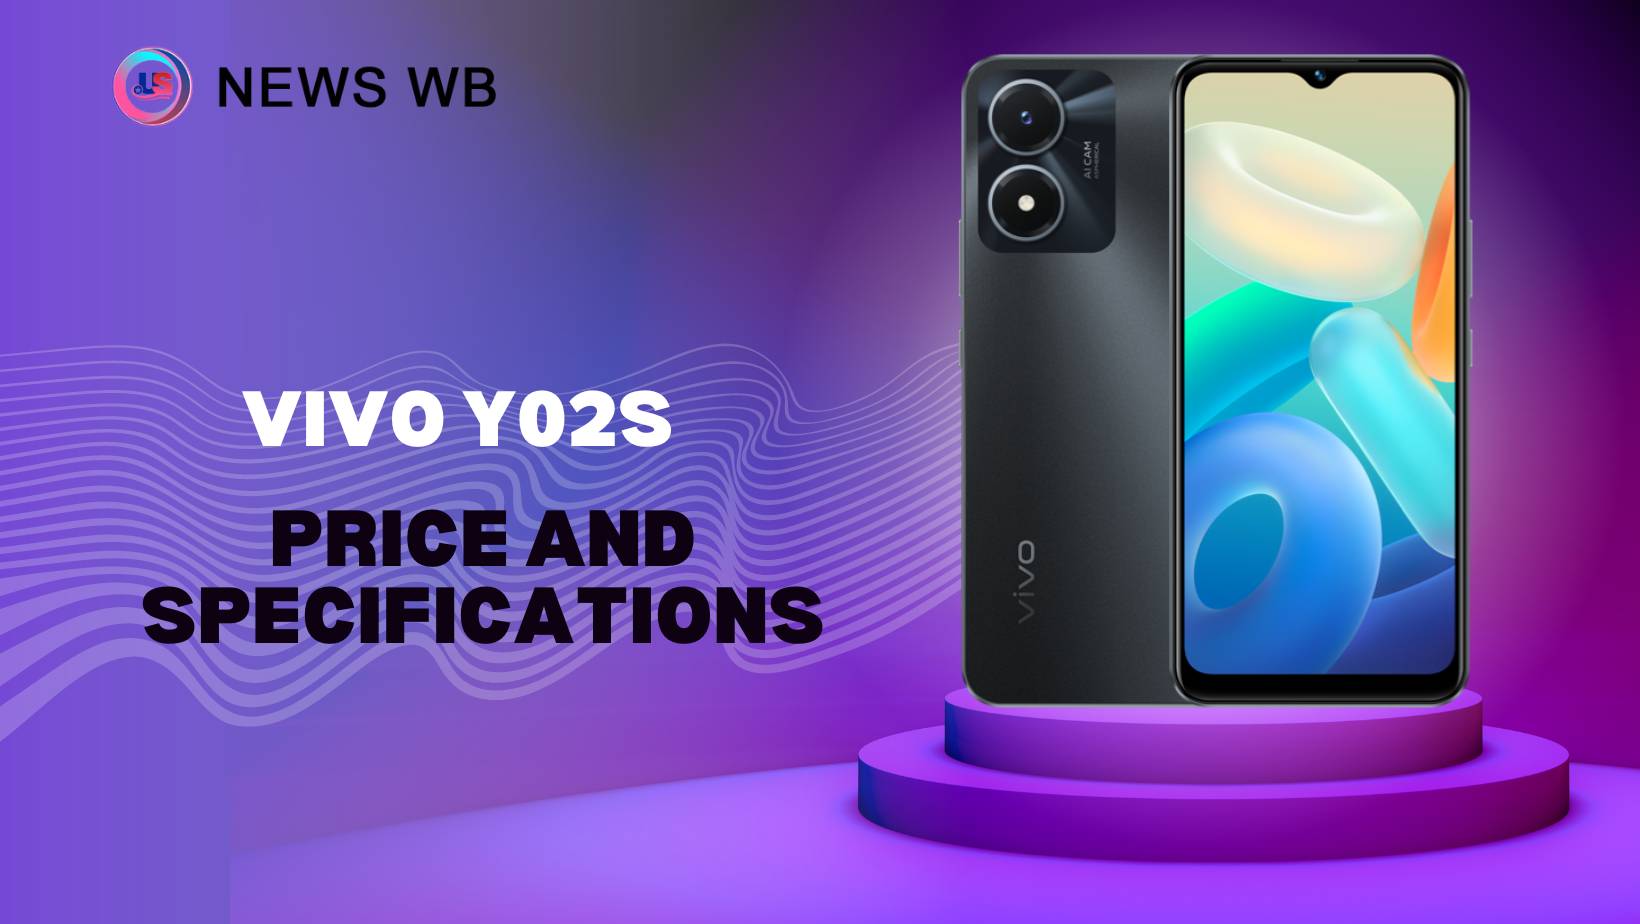 Vivo Y02s Price and Specifications